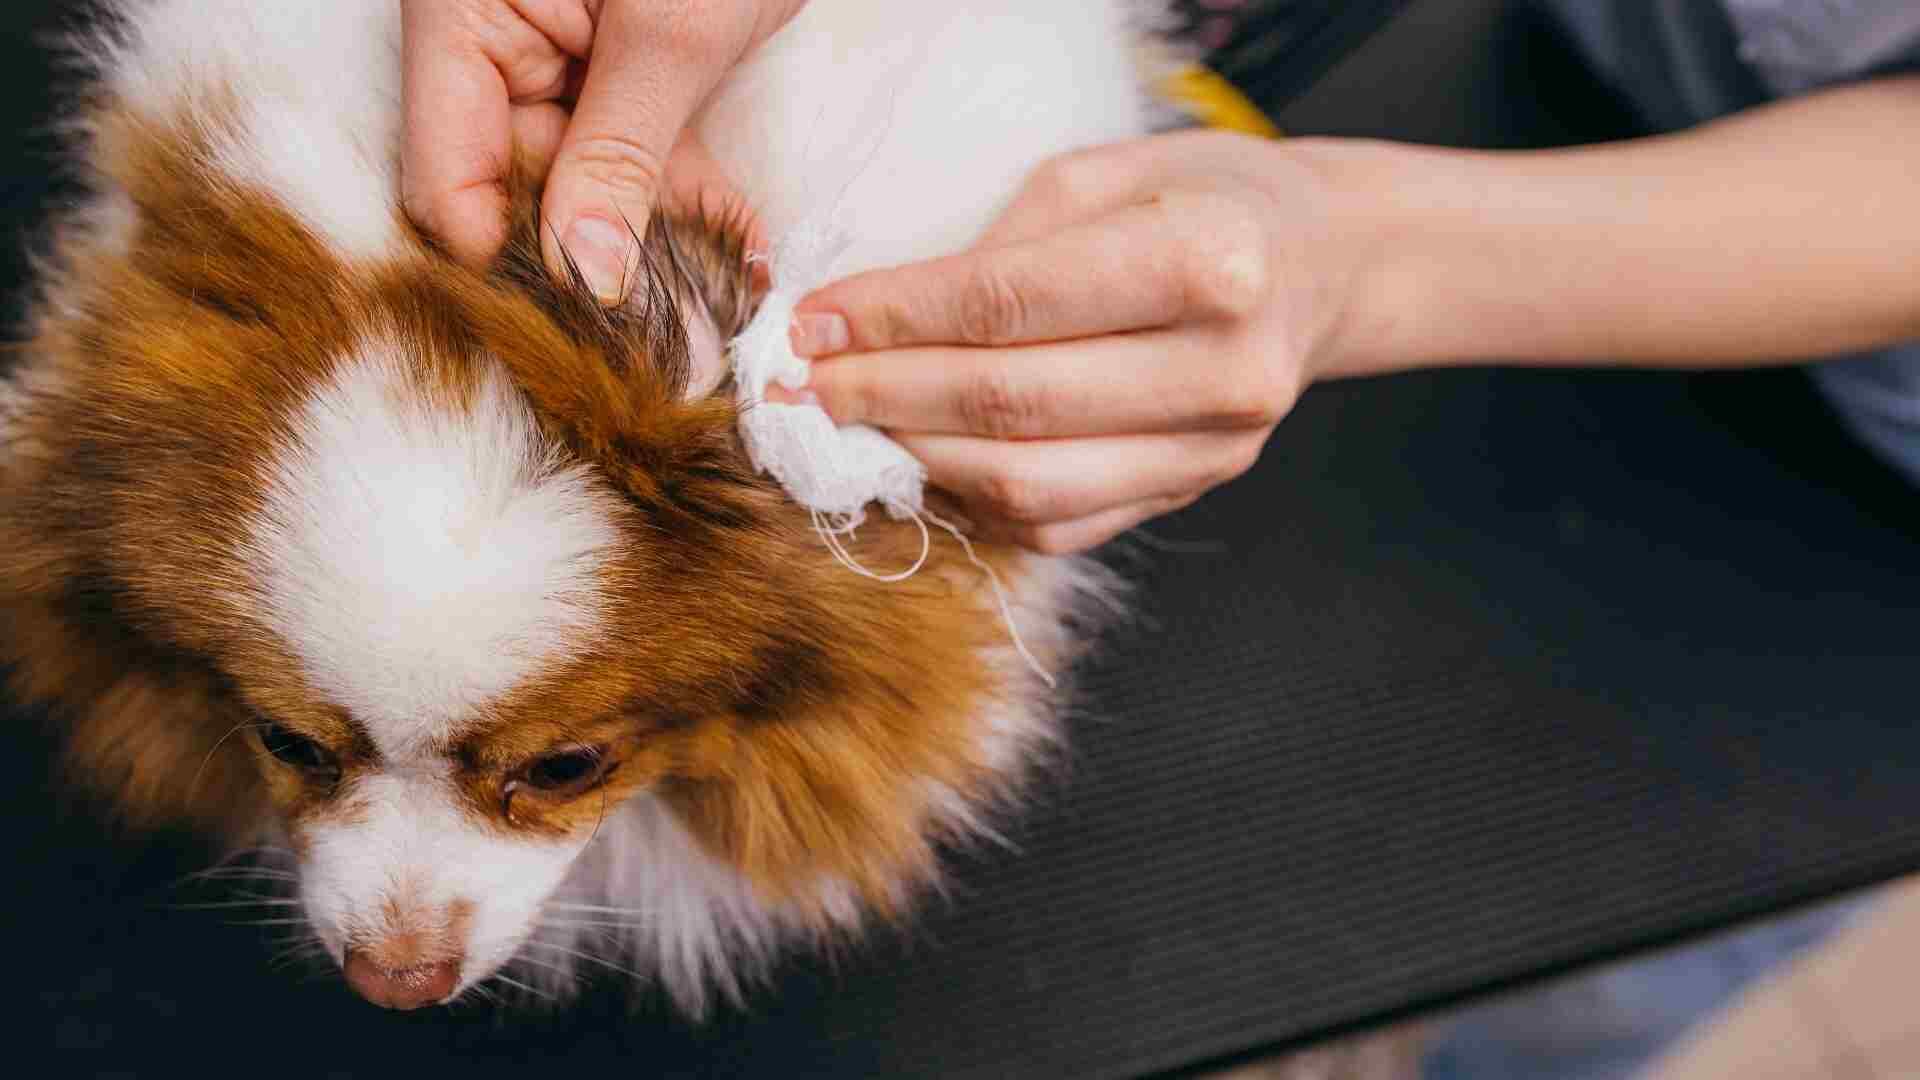 Dog Shaking Head After Ear Cleaning: What to Do Guide